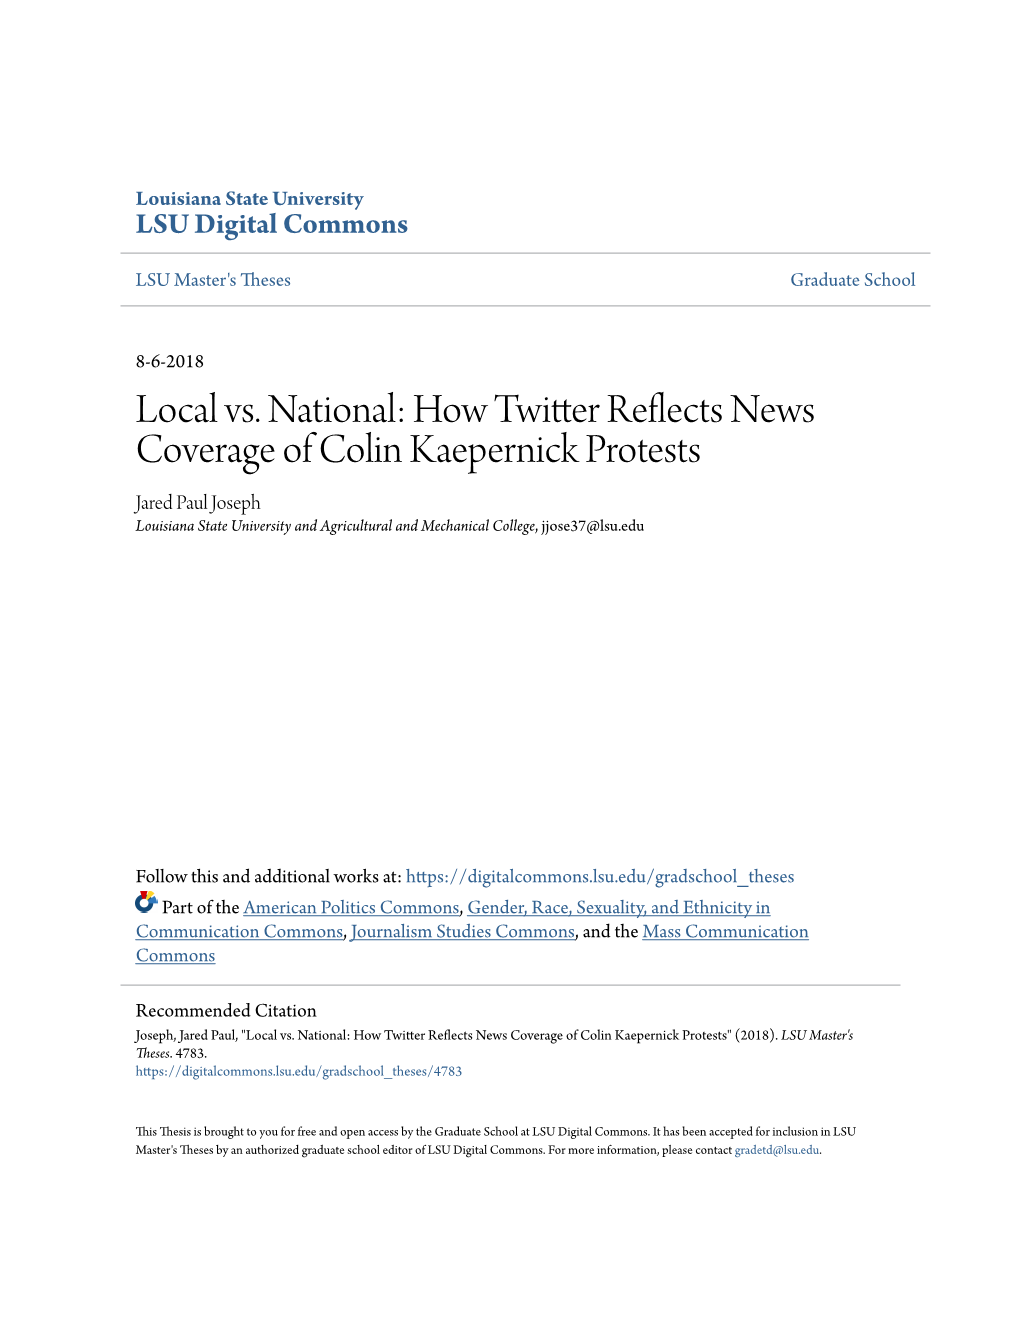 How Twitter Reflects News Coverage of Colin Kaepernick Protests Jared Paul Joseph Louisiana State University and Agricultural and Mechanical College, Jjose37@Lsu.Edu